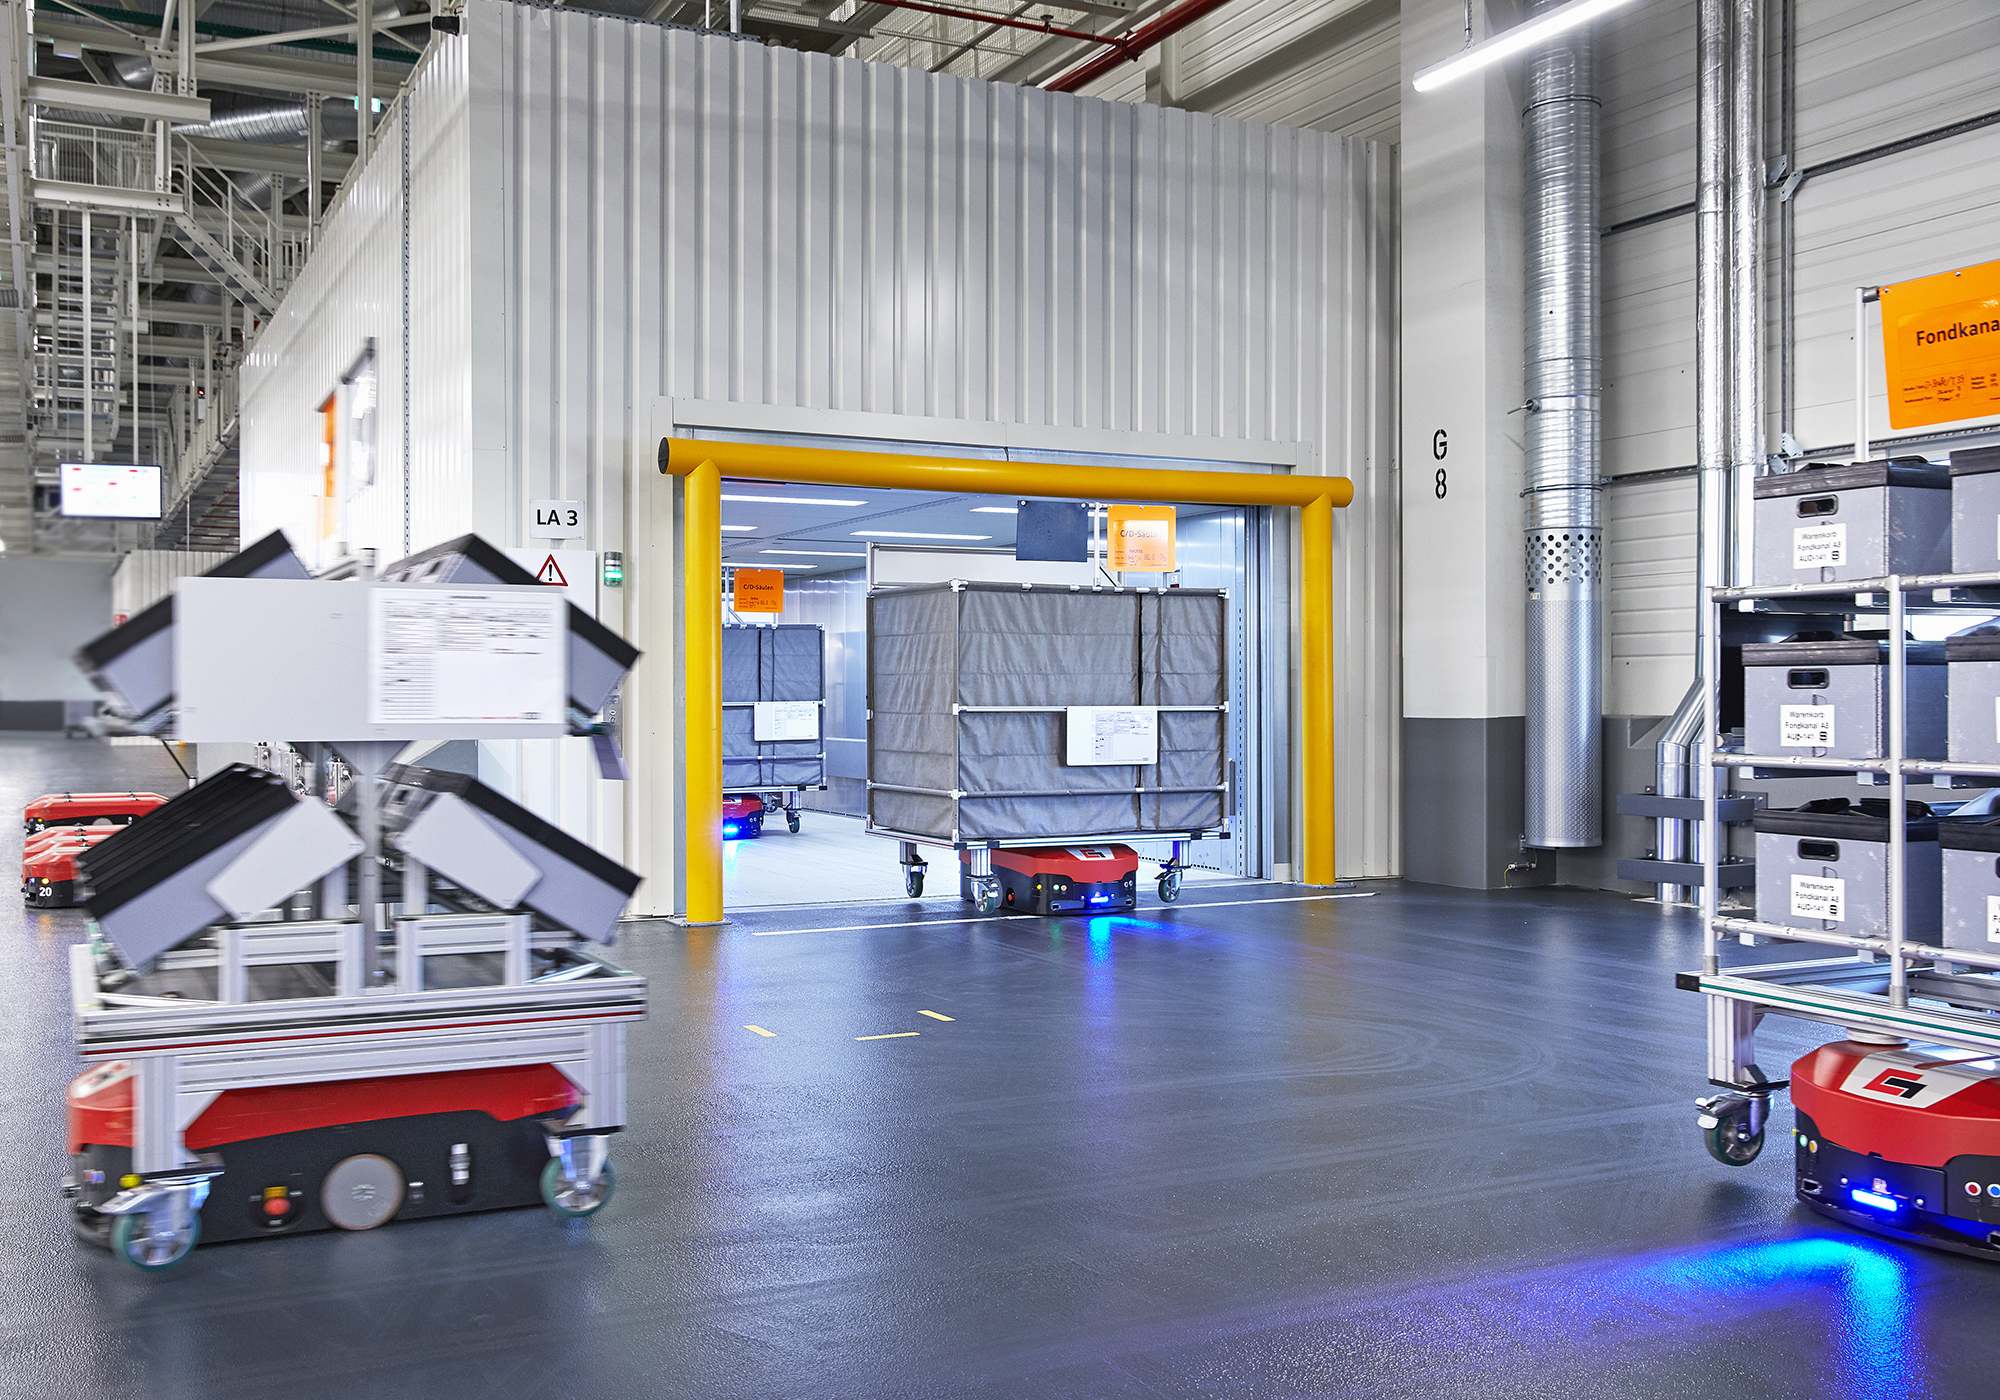 The Grenzebach Group’s automated guided vehicle systems for automatic parts transport apply technical intelligence to intralogistics processes.